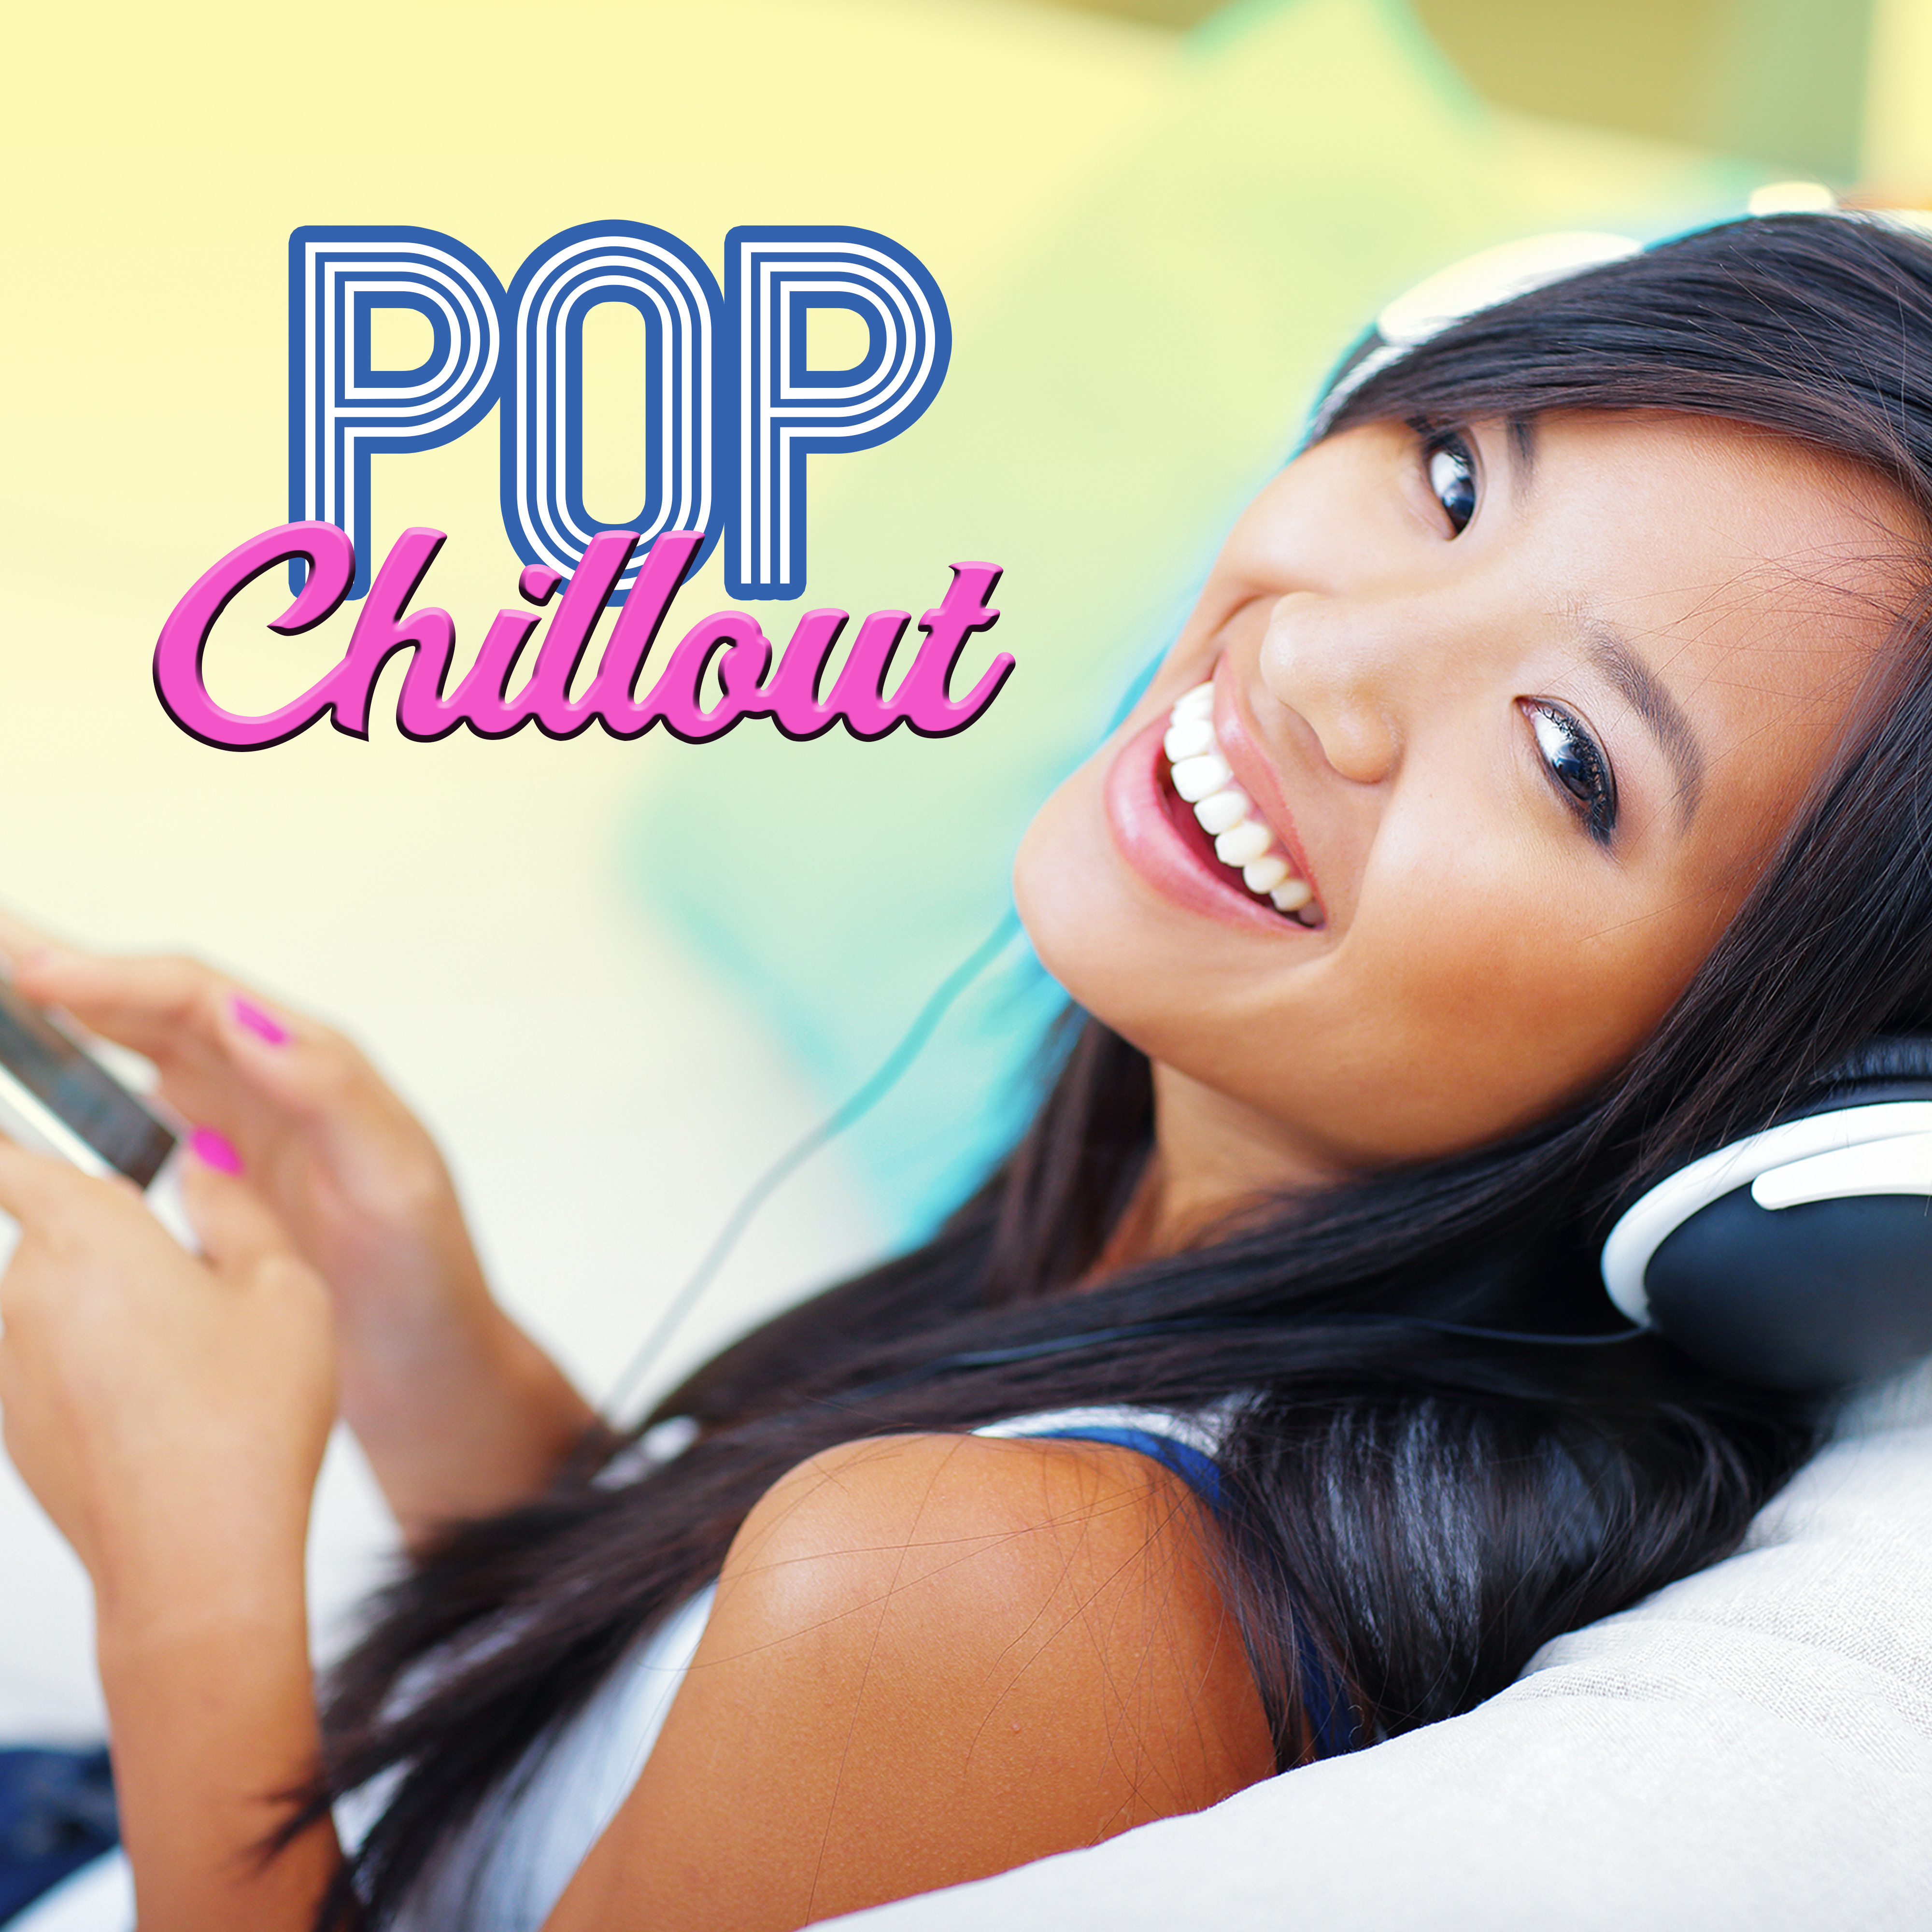 Pop Chillout  Summer Chillout, Relax, Under The Palms, Beach House, Kos Lounge